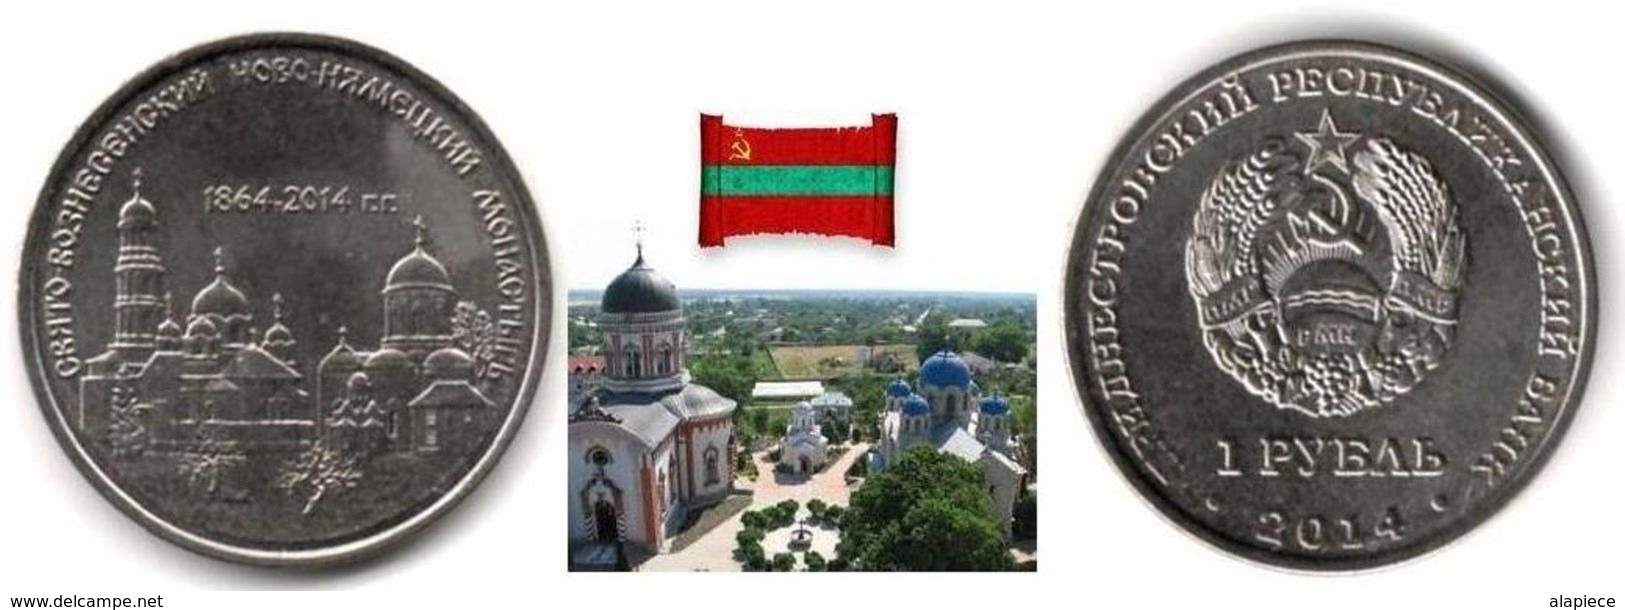 Transnistria - 1 Rouble 2014 (UNC - Holy Ascension New Neamt Monastery - 50,000 Ex.) - Moldova